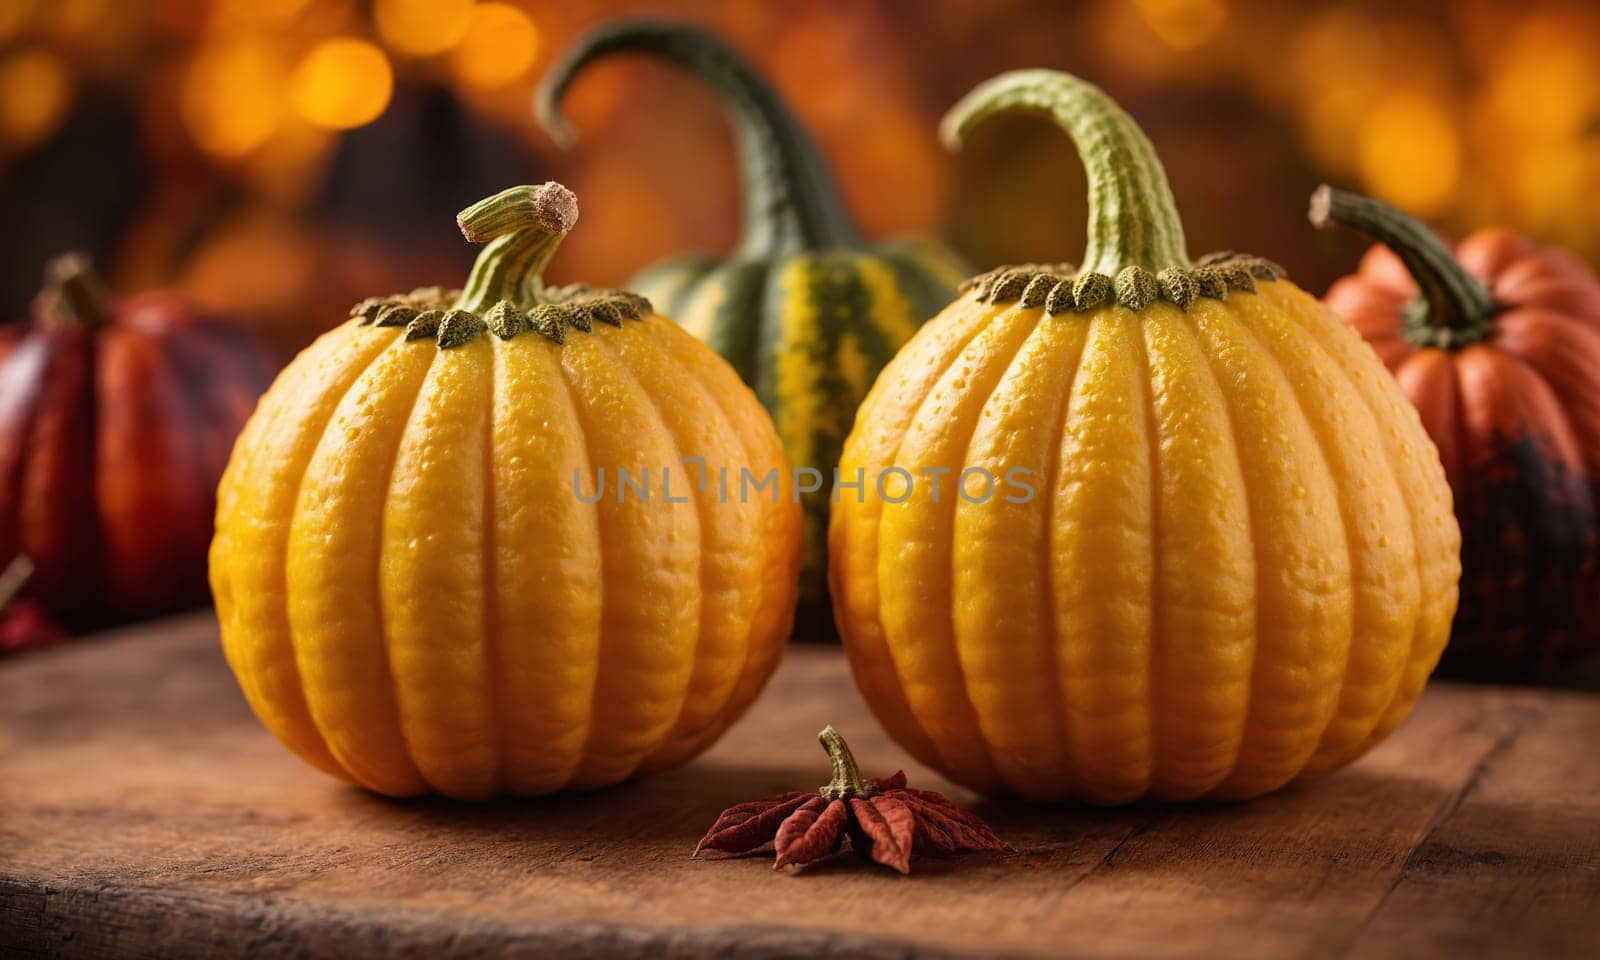 Group of pumpkins, a type of winter squash, sitting on a wooden table by Andre1ns